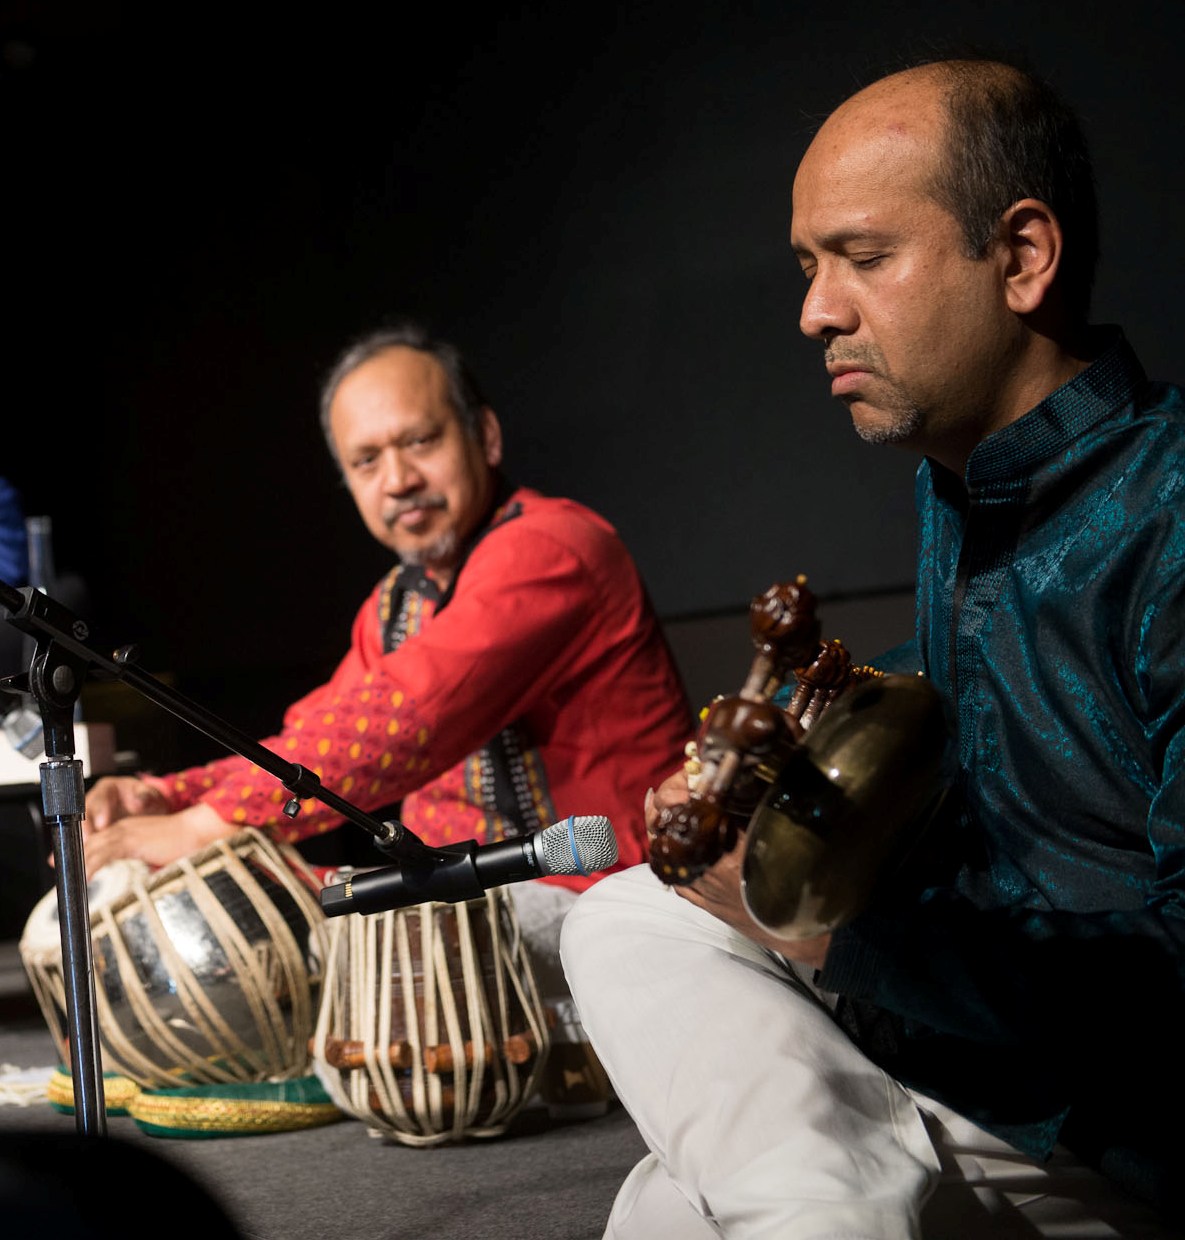 Two men sitting on a stage playing musical instruments.